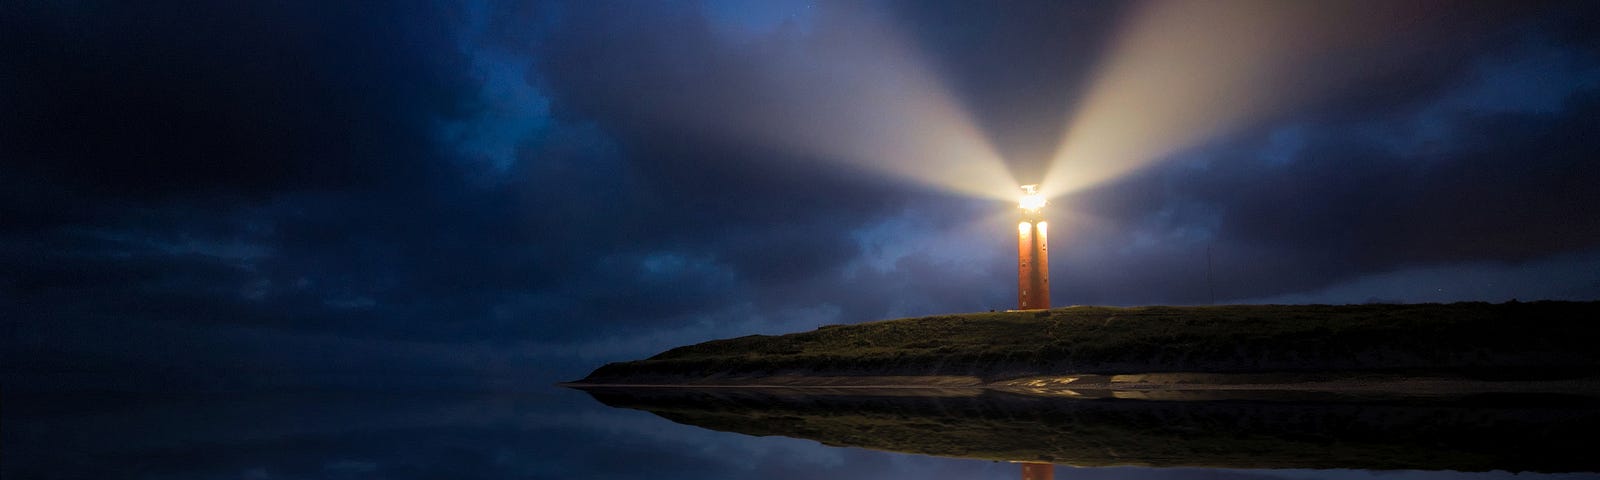 A graphic picture of a Lighthouse flashing at night.